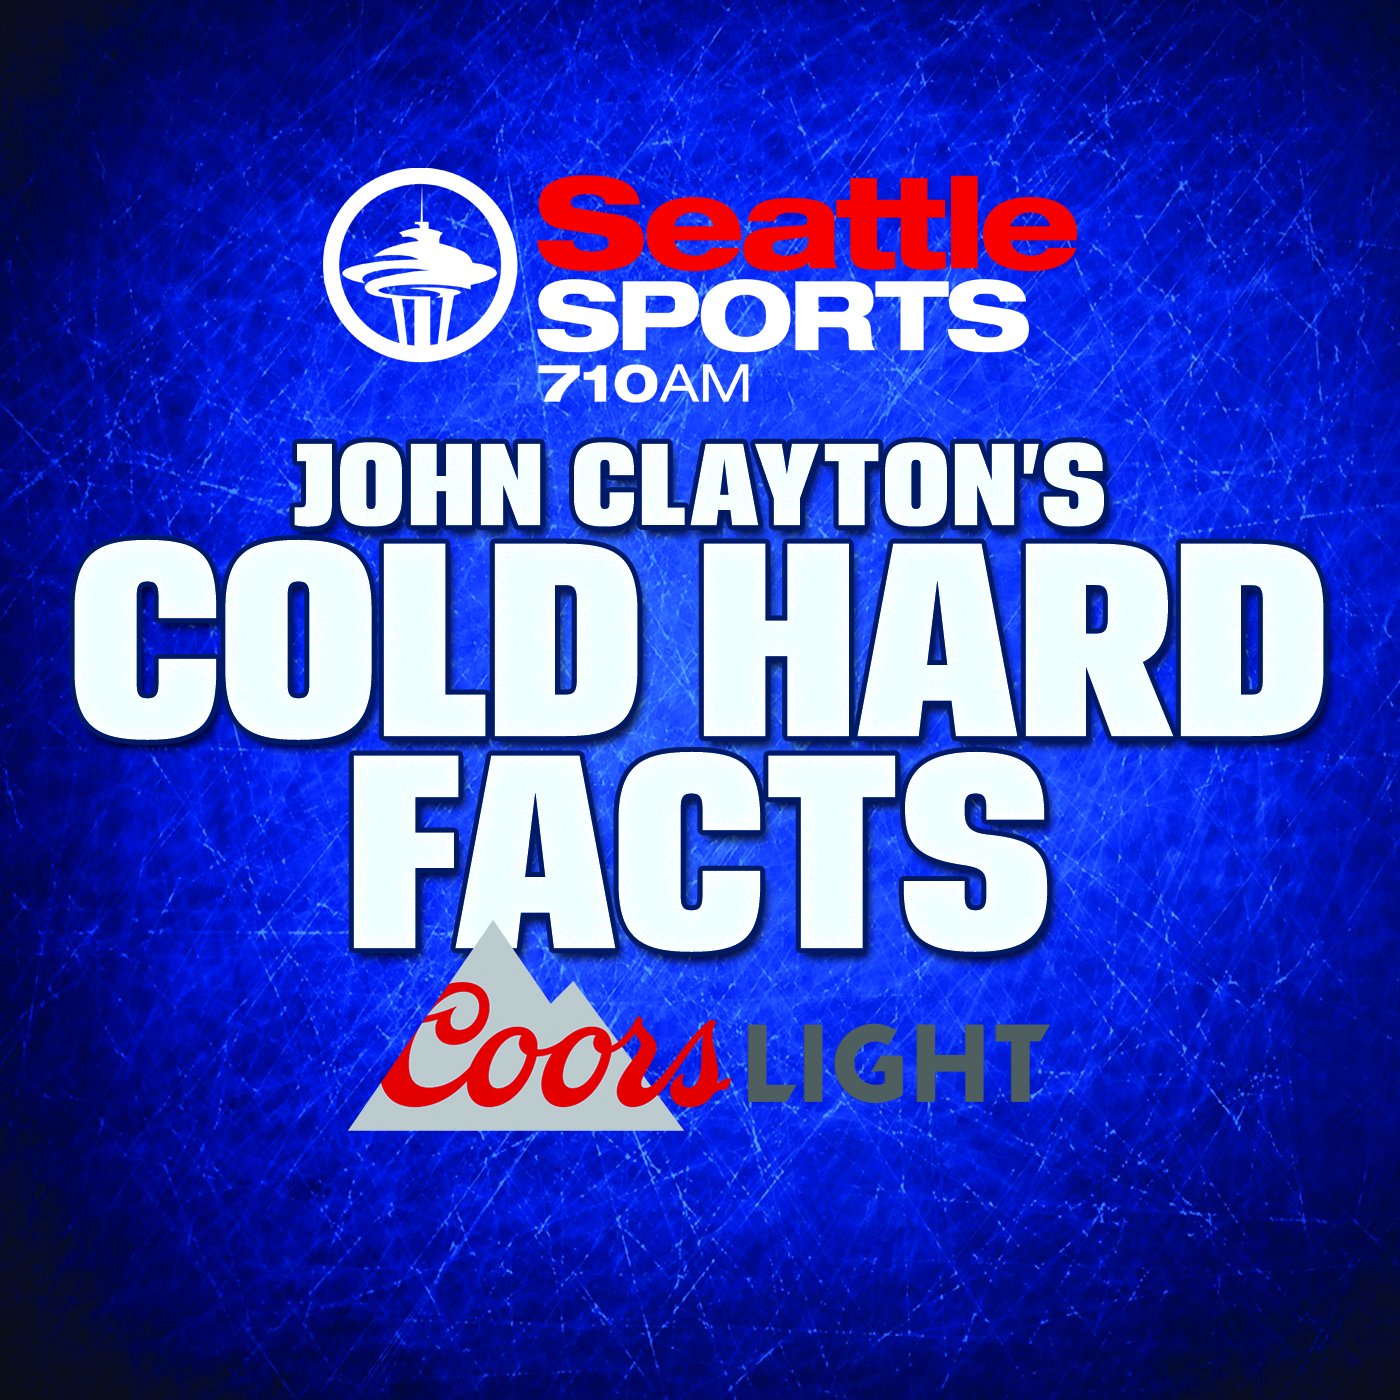 John Clayton on the tanking allegations in the NFL